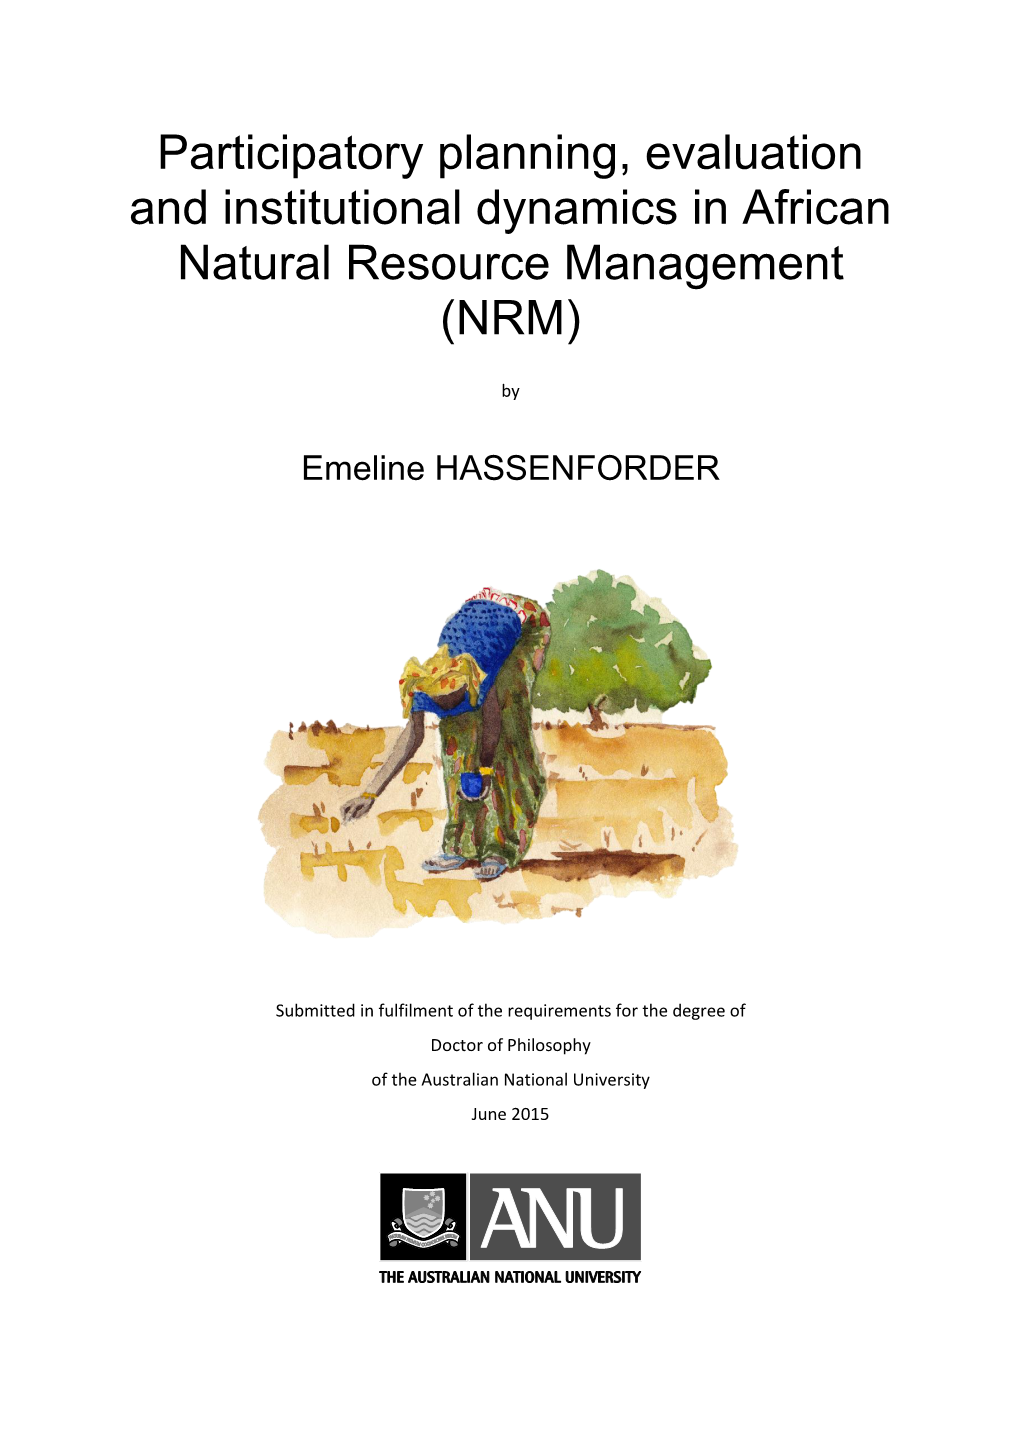 Participatory Planning, Evaluation and Institutional Dynamics in African Natural Resource Management (NRM)